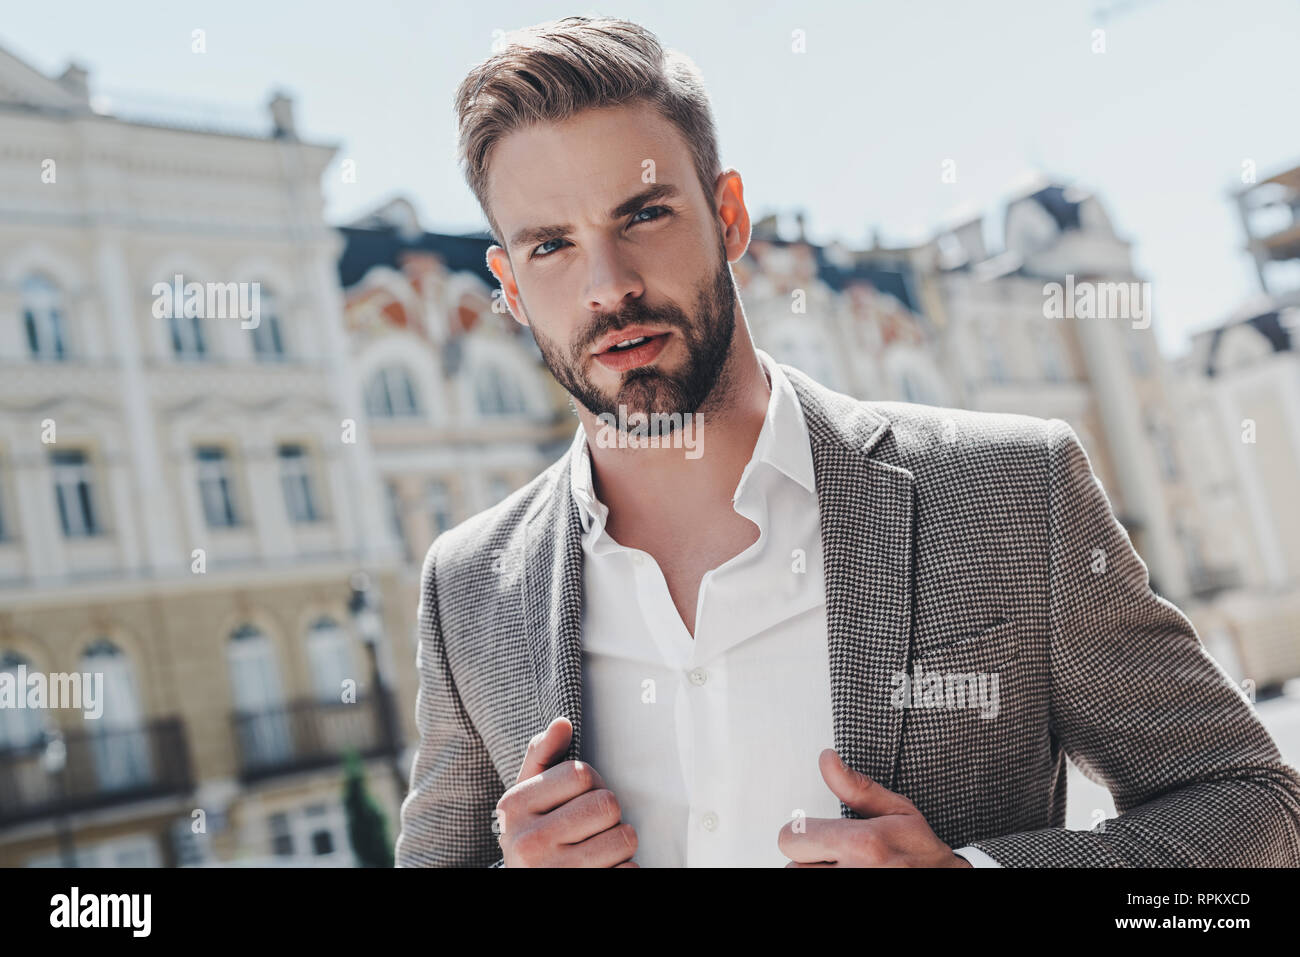 Handsome young businessman walking on city street. He is going to work in office wear smart casual outfit of brown jacket and white shirt. Urban lifestyle of young professionals. Stock Photo